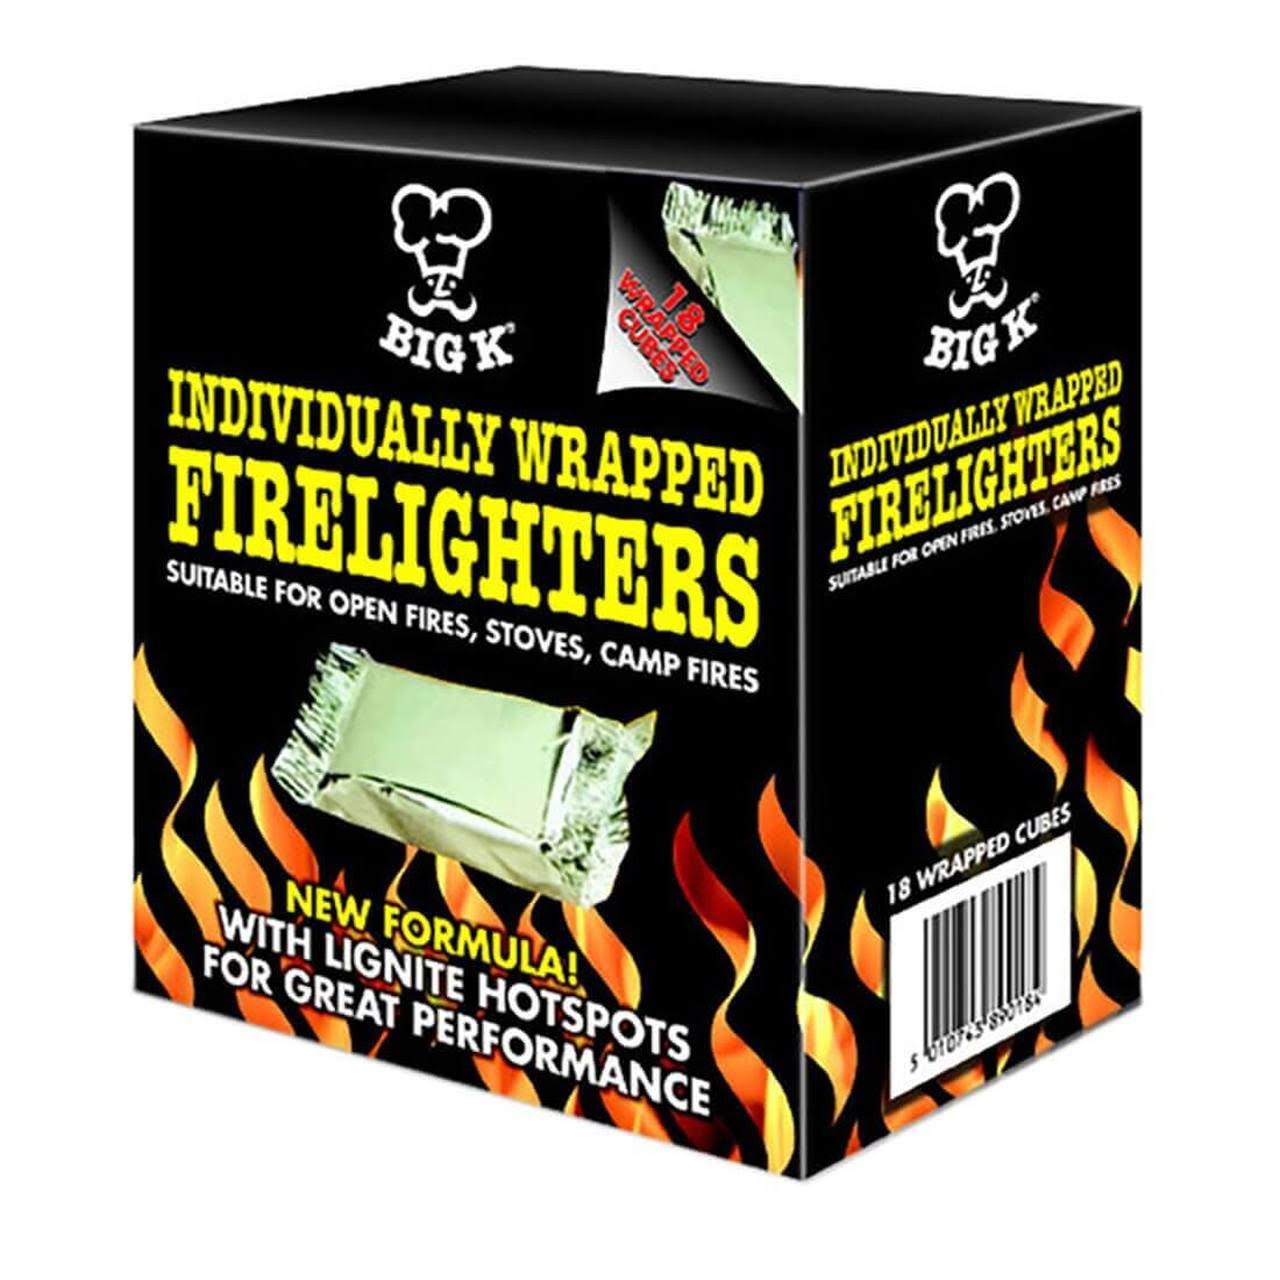 Big K 18 Individually Wrapped Firelighters